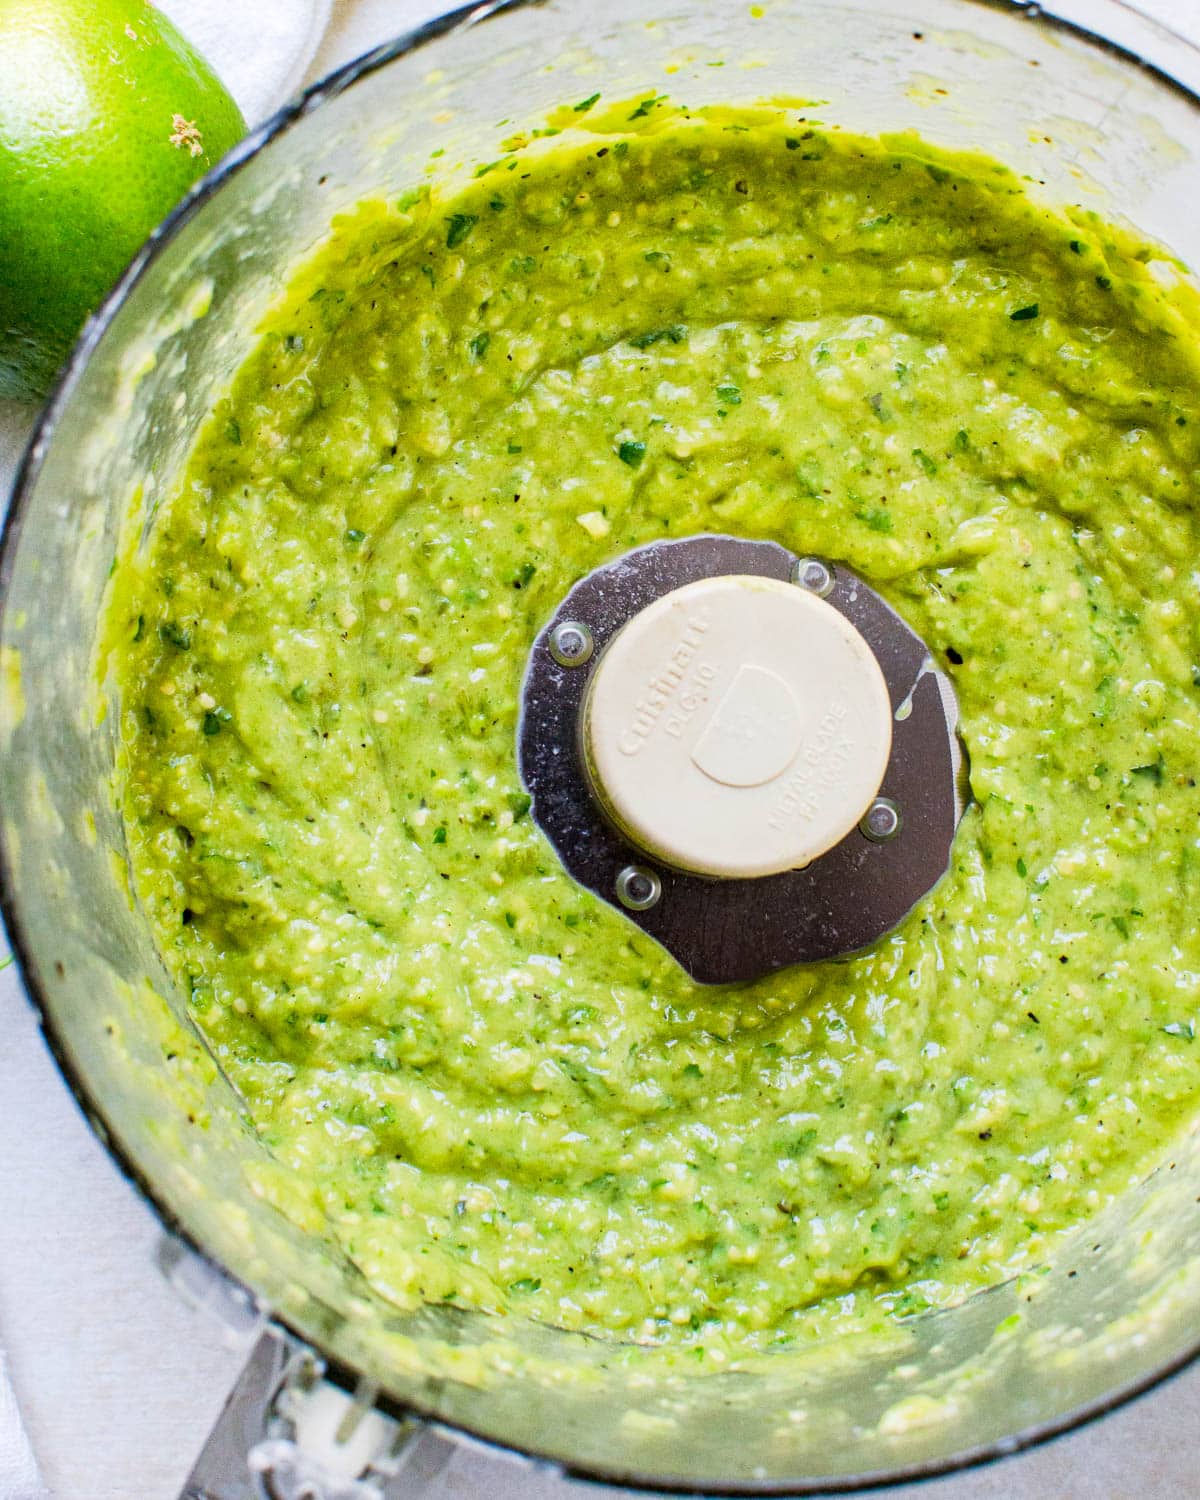 The avocado salsa blended until smooth.